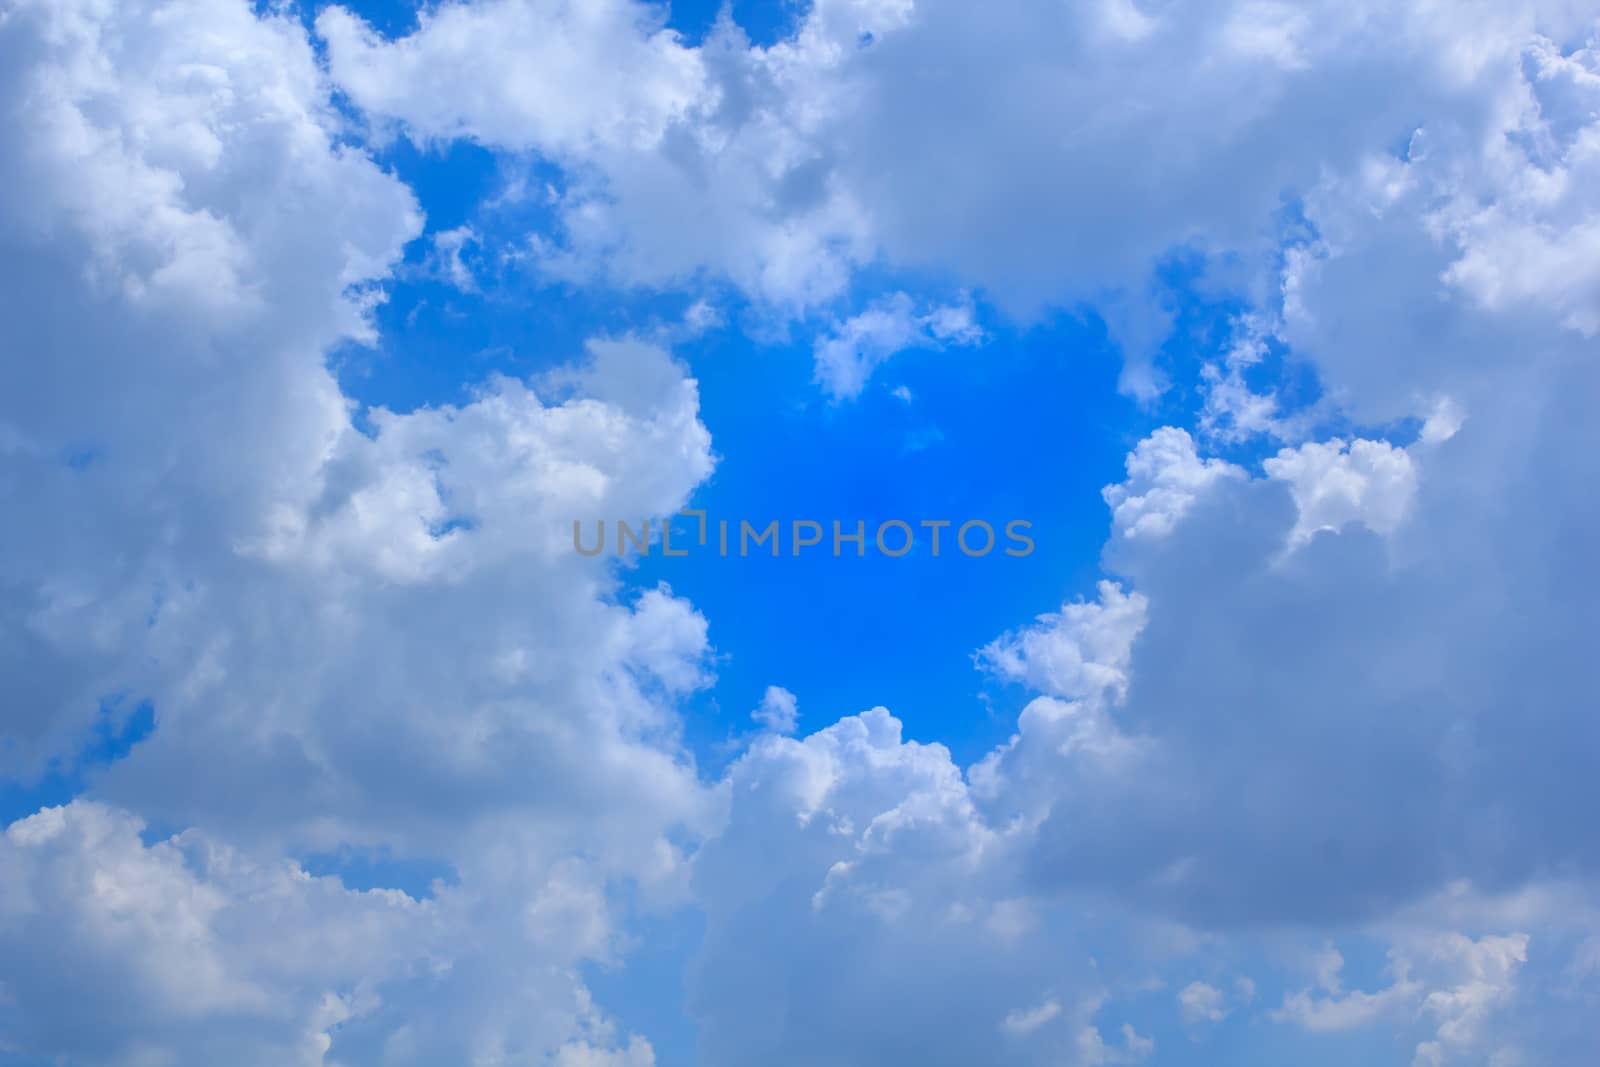 clouds in the blue sky is very beautiful.